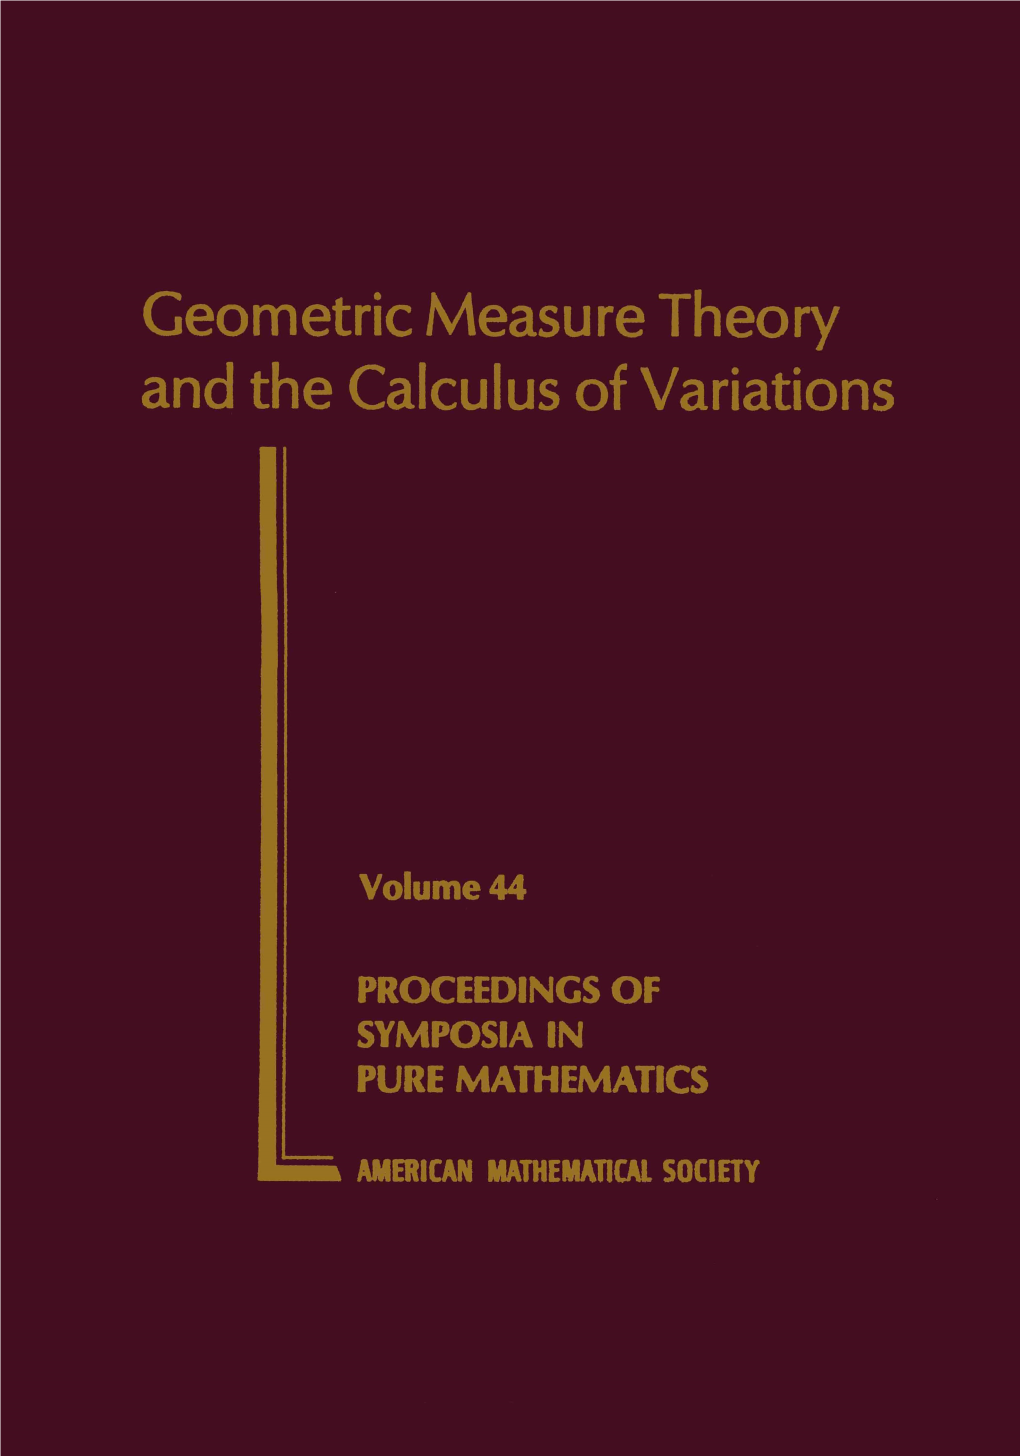 Geometric Measure Theory and the Calculus of Variations PROCEEDINGS of SYMPOSIA in PURE MATHEMATICS Volume 44